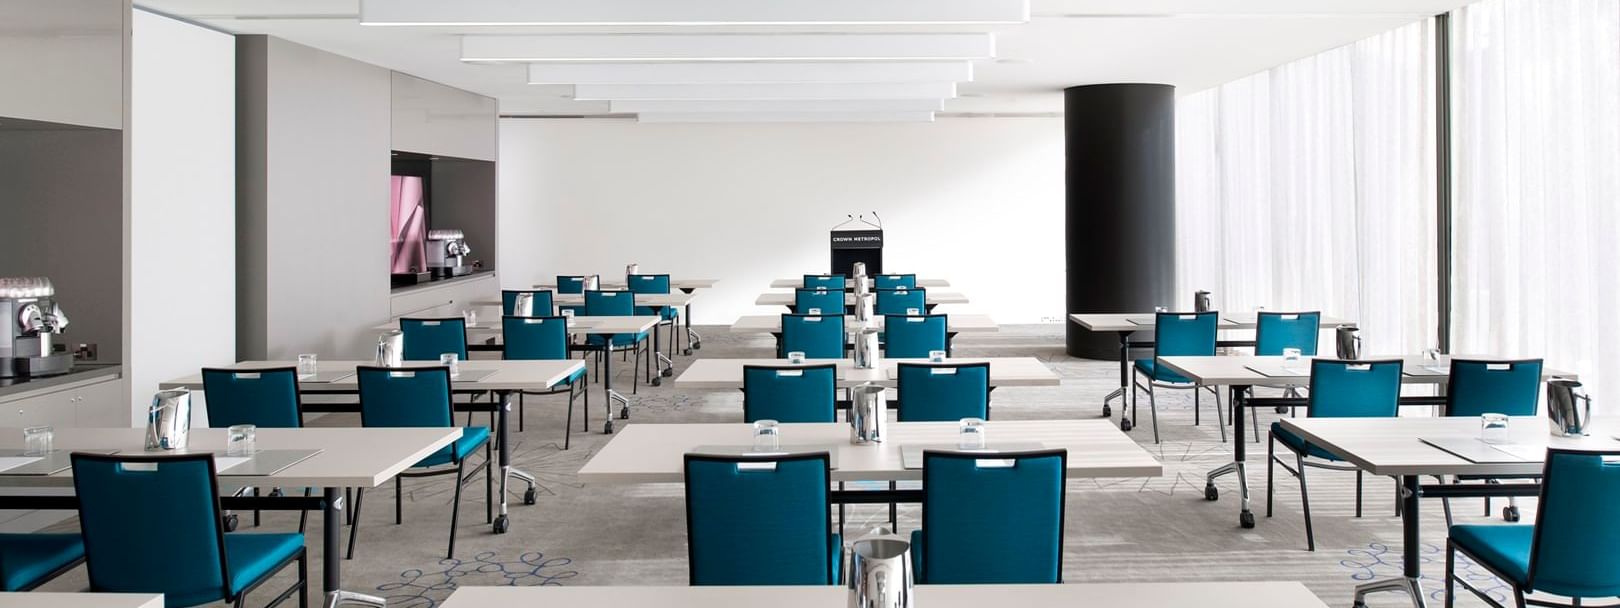 Classroom setup in a Meeting Room at Crown Hotel Melbourne